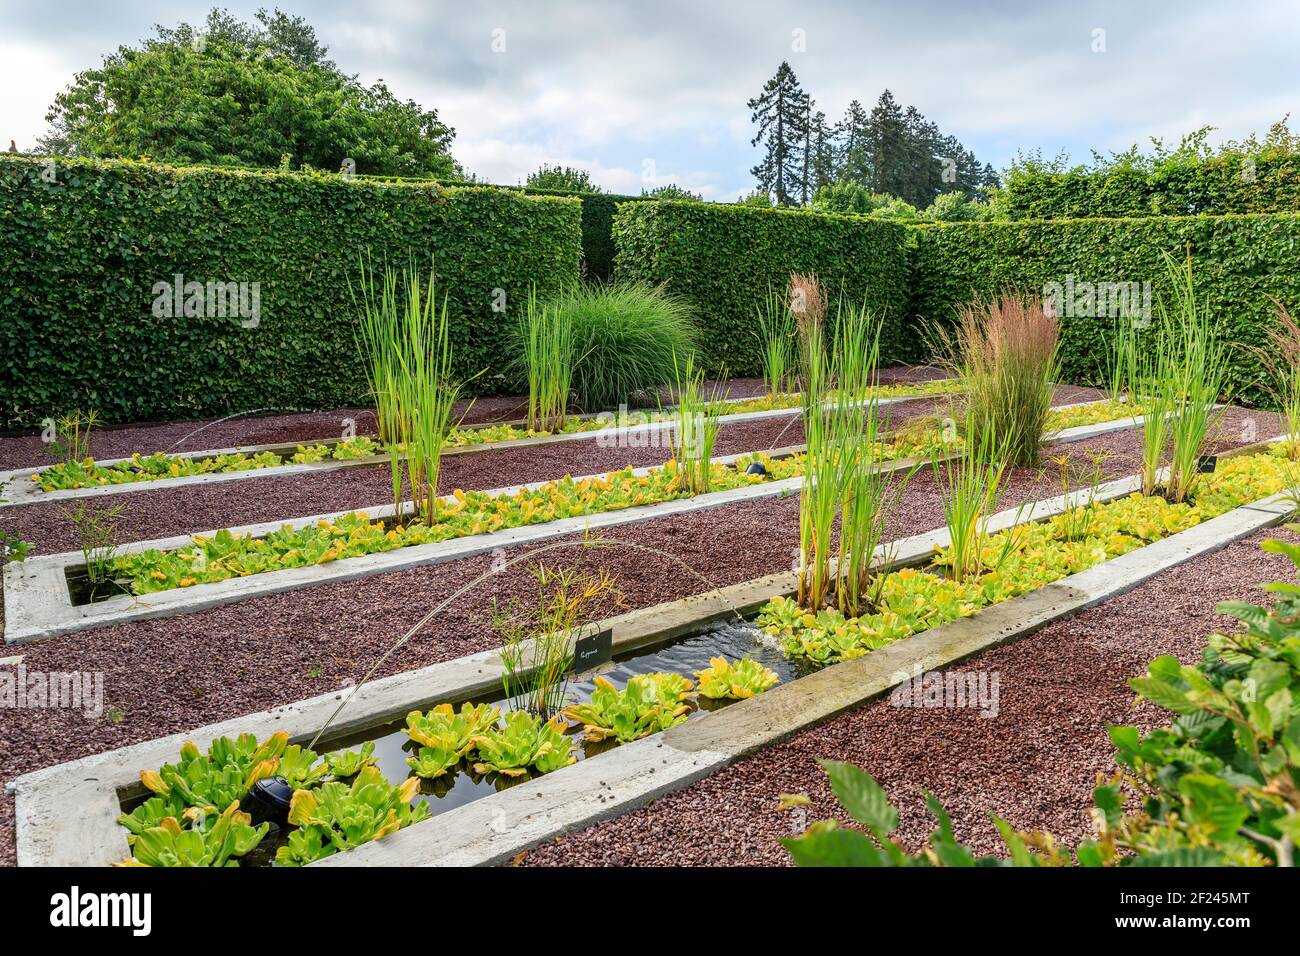 France, Loir et Cher, Cheverny, Chateau de Cheverny, the vegetable garden, basins with water lettuce (Pistia stratiotes), Typha latifolia ...  // Fran Stock Photo